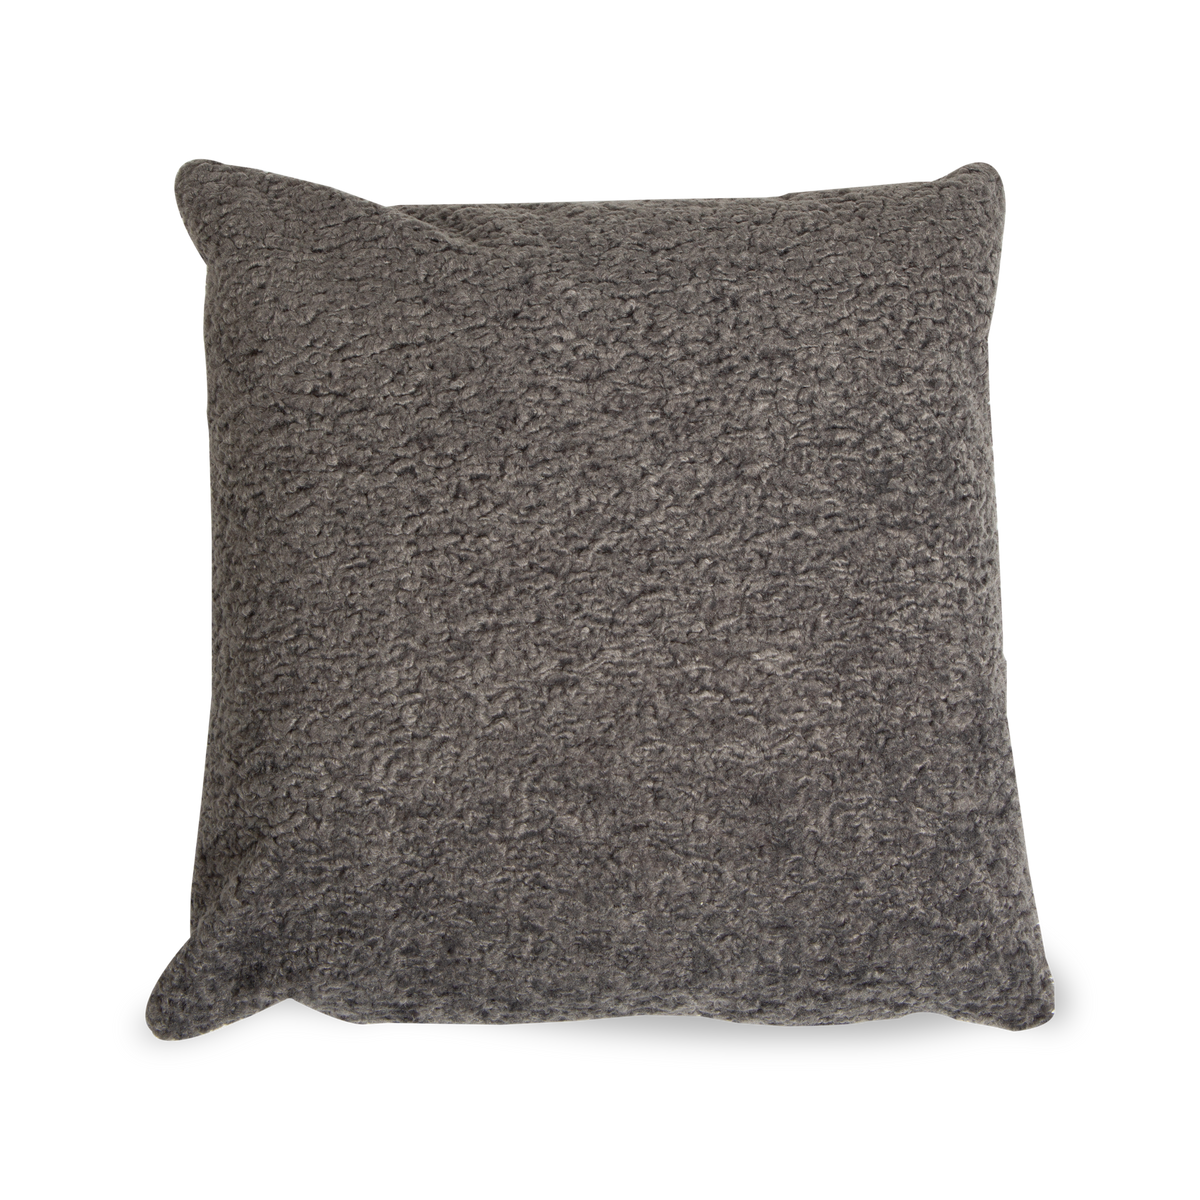 This grey Sheepskin Pillow adds natural texture to your space.